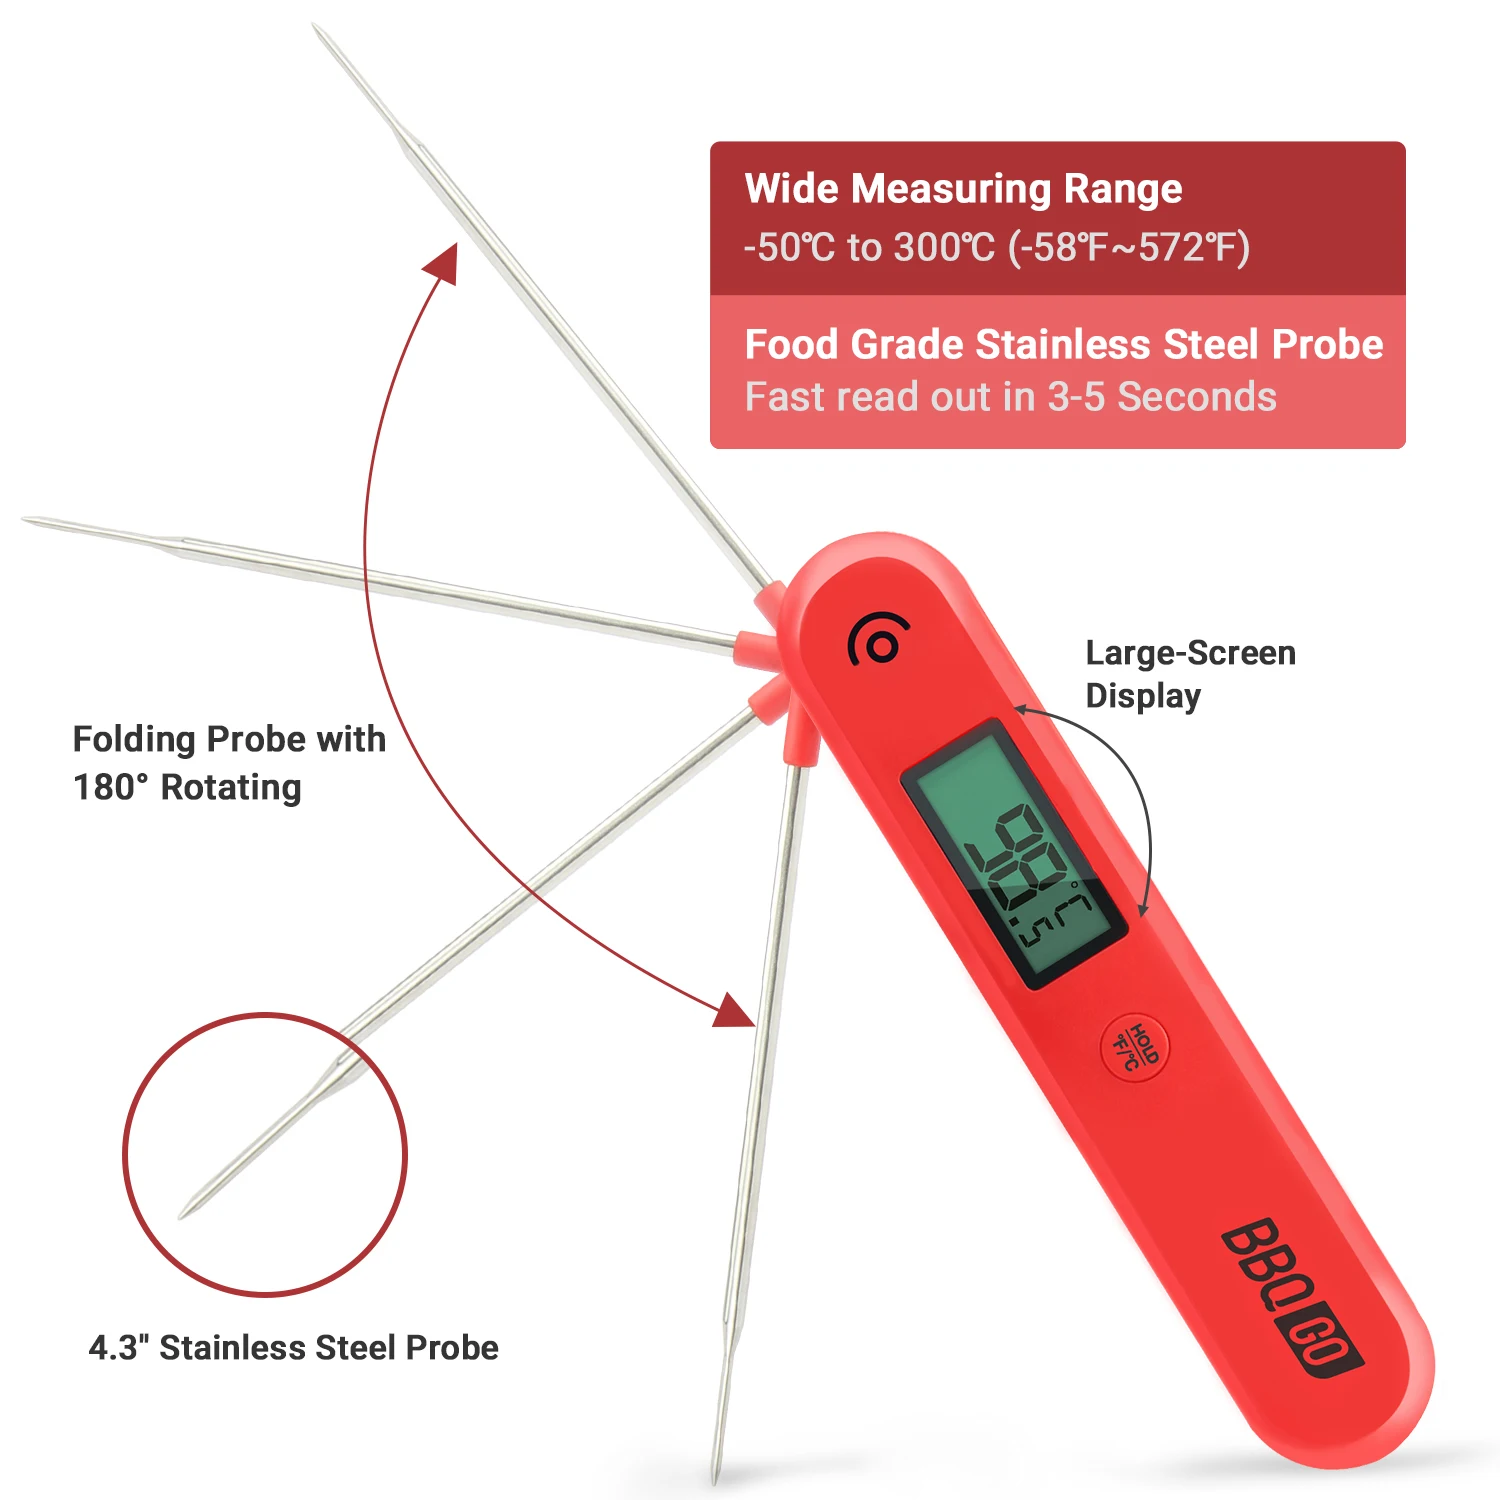 https://ae01.alicdn.com/kf/H975bde2b837d41eb854bf68284cb03bb4/INKBIRD-BG-HH1C-Handheld-Kitchen-Cooking-Temperature-Probe-Culinary-Thermometer-for-Food-Liquid-Meat-Candy-BBQ.jpg